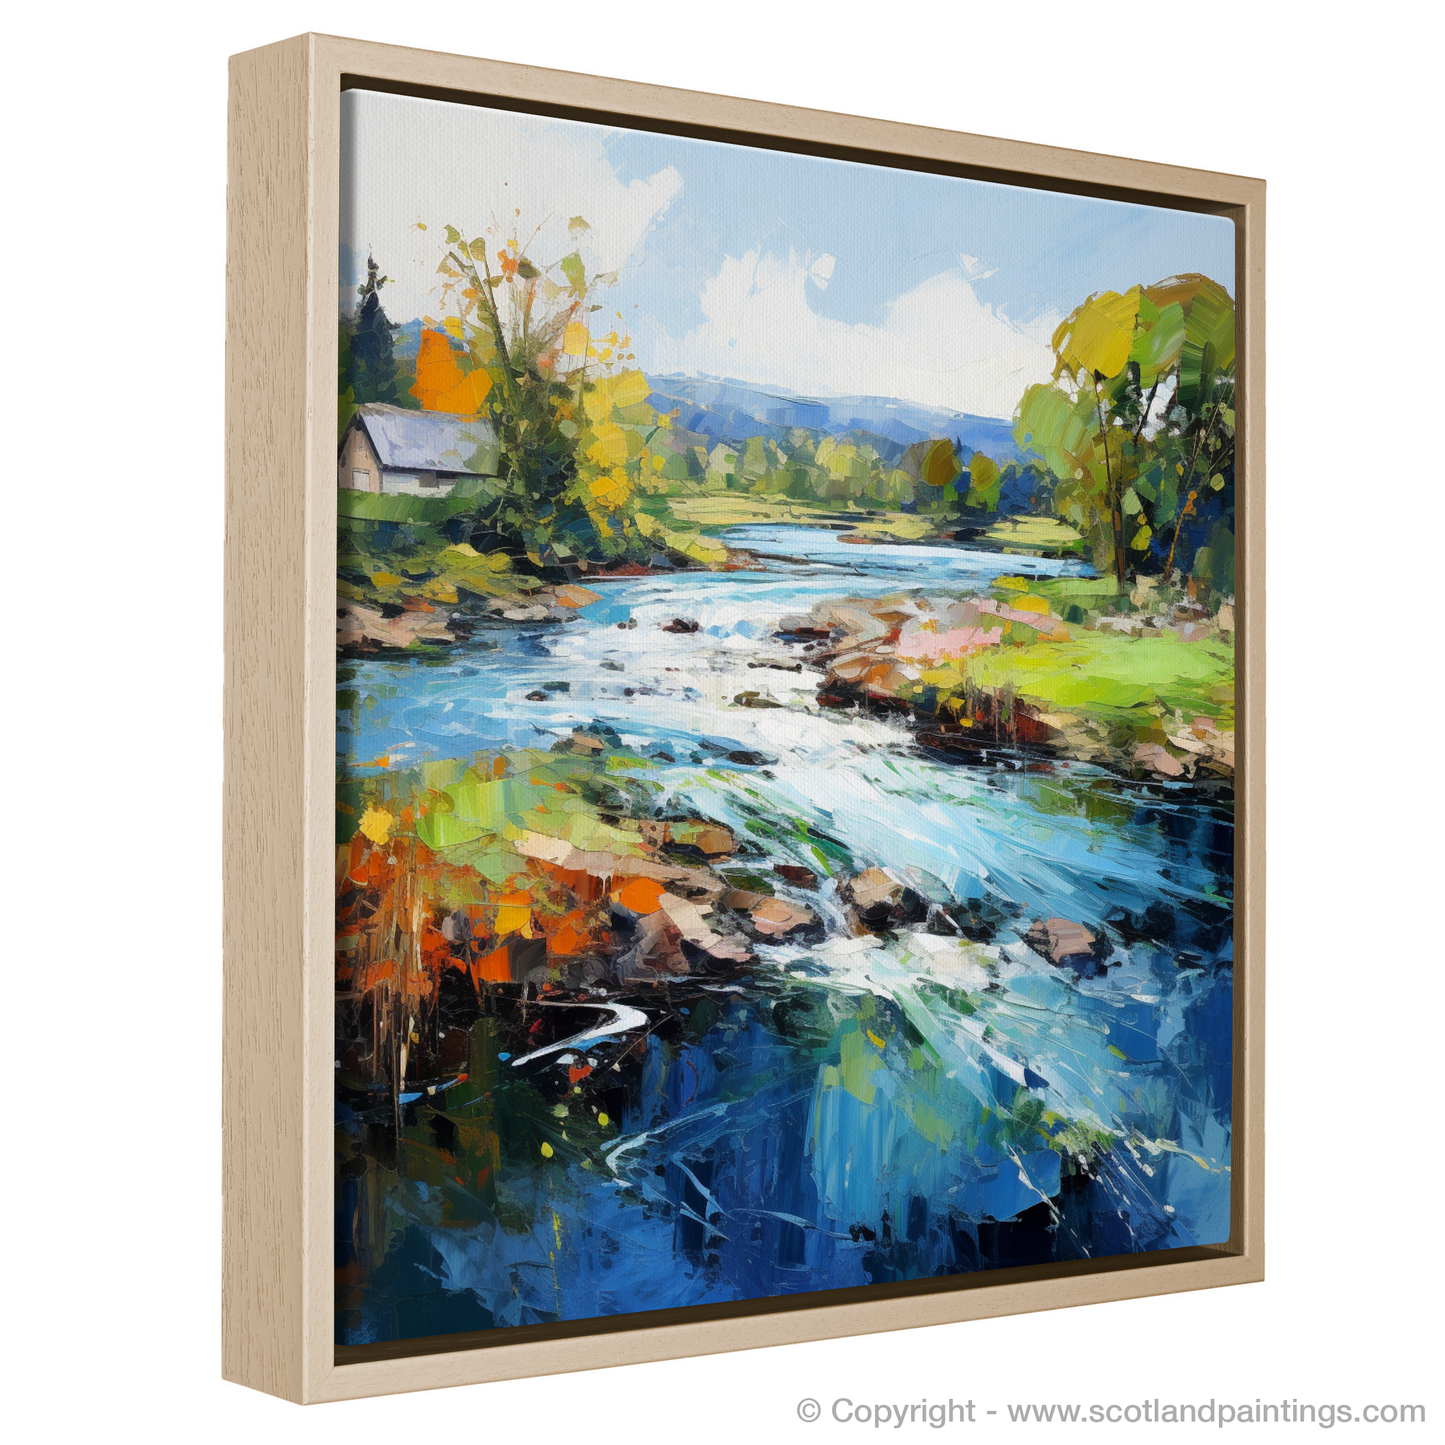 Painting and Art Print of River Leven, West Dunbartonshire entitled "Cascades and Colours of the River Leven".